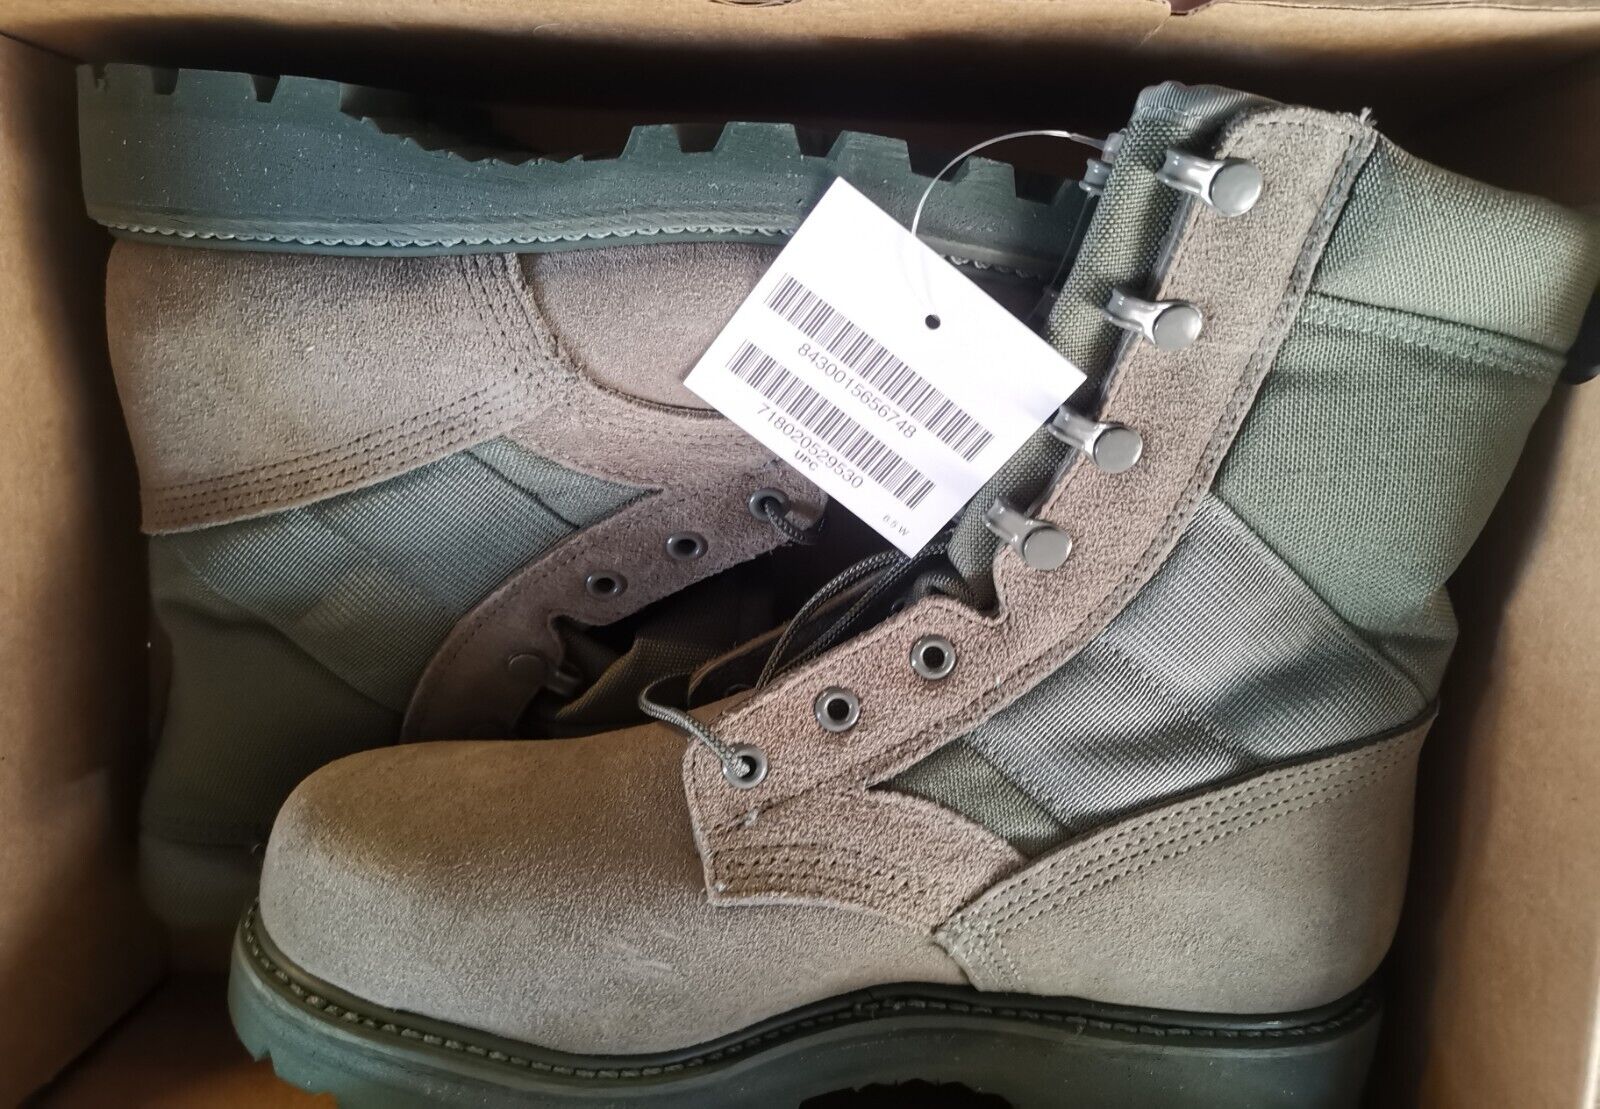 US Army Hot Weather Safety Combat Boots Thorogood size 5.5 UK sage green